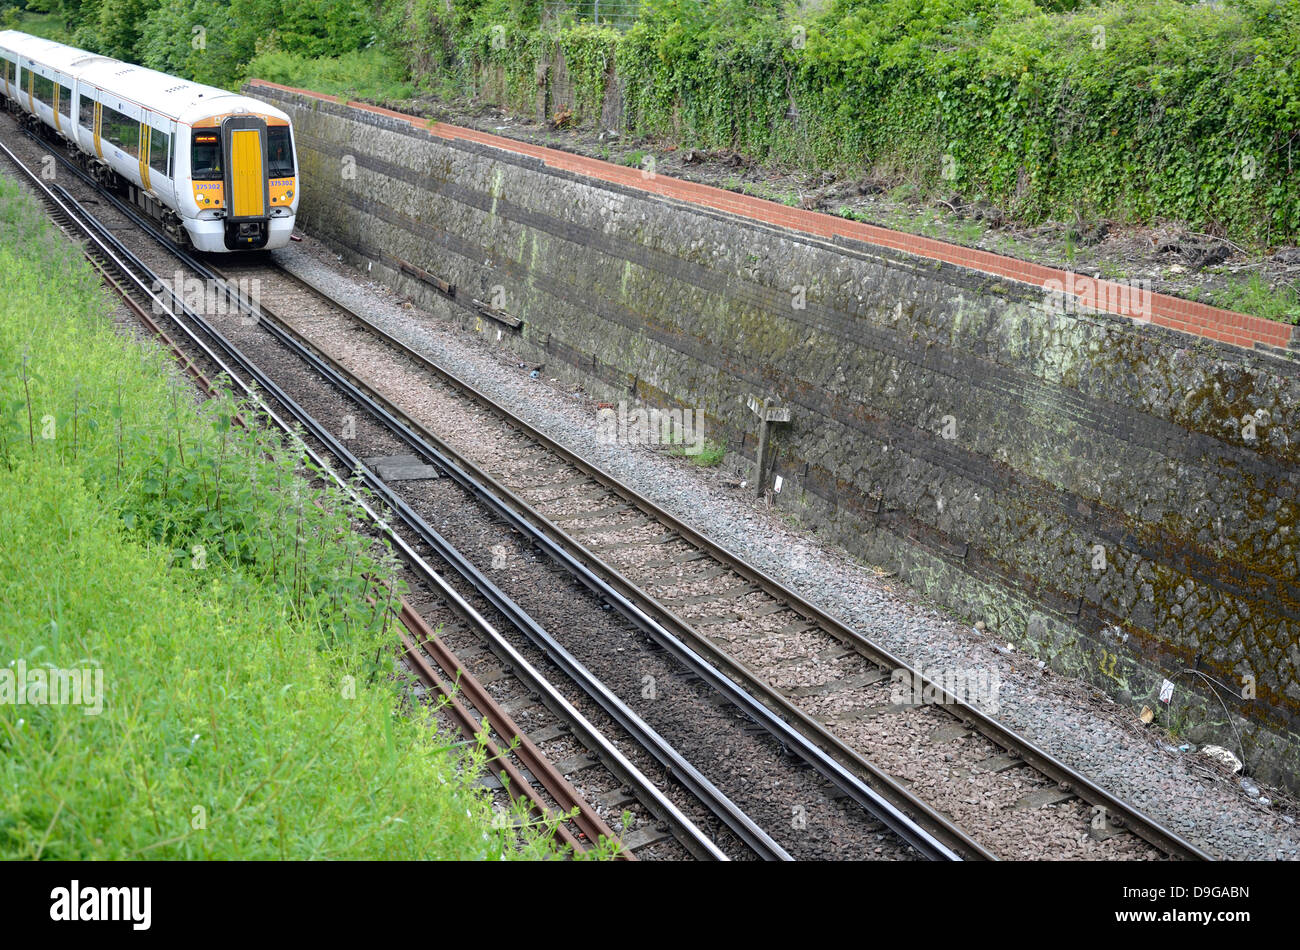 Maidstone, Kent, England. South Eastern train (class 357 'Electrostar') passing through cutting near the town centre Stock Photo